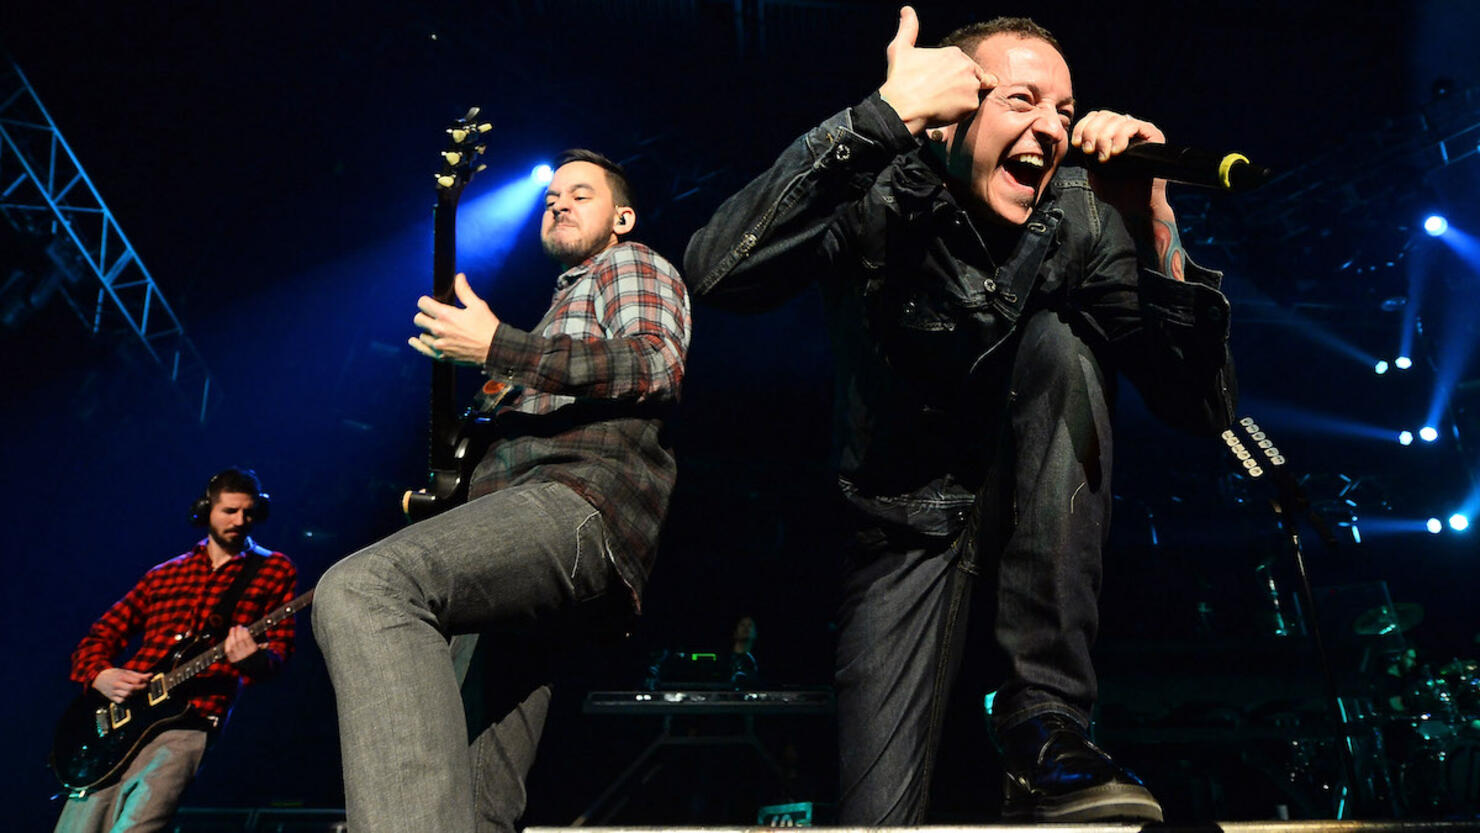 LINKIN PARK To Release 'Lost' Song From 'Meteora' Archives 